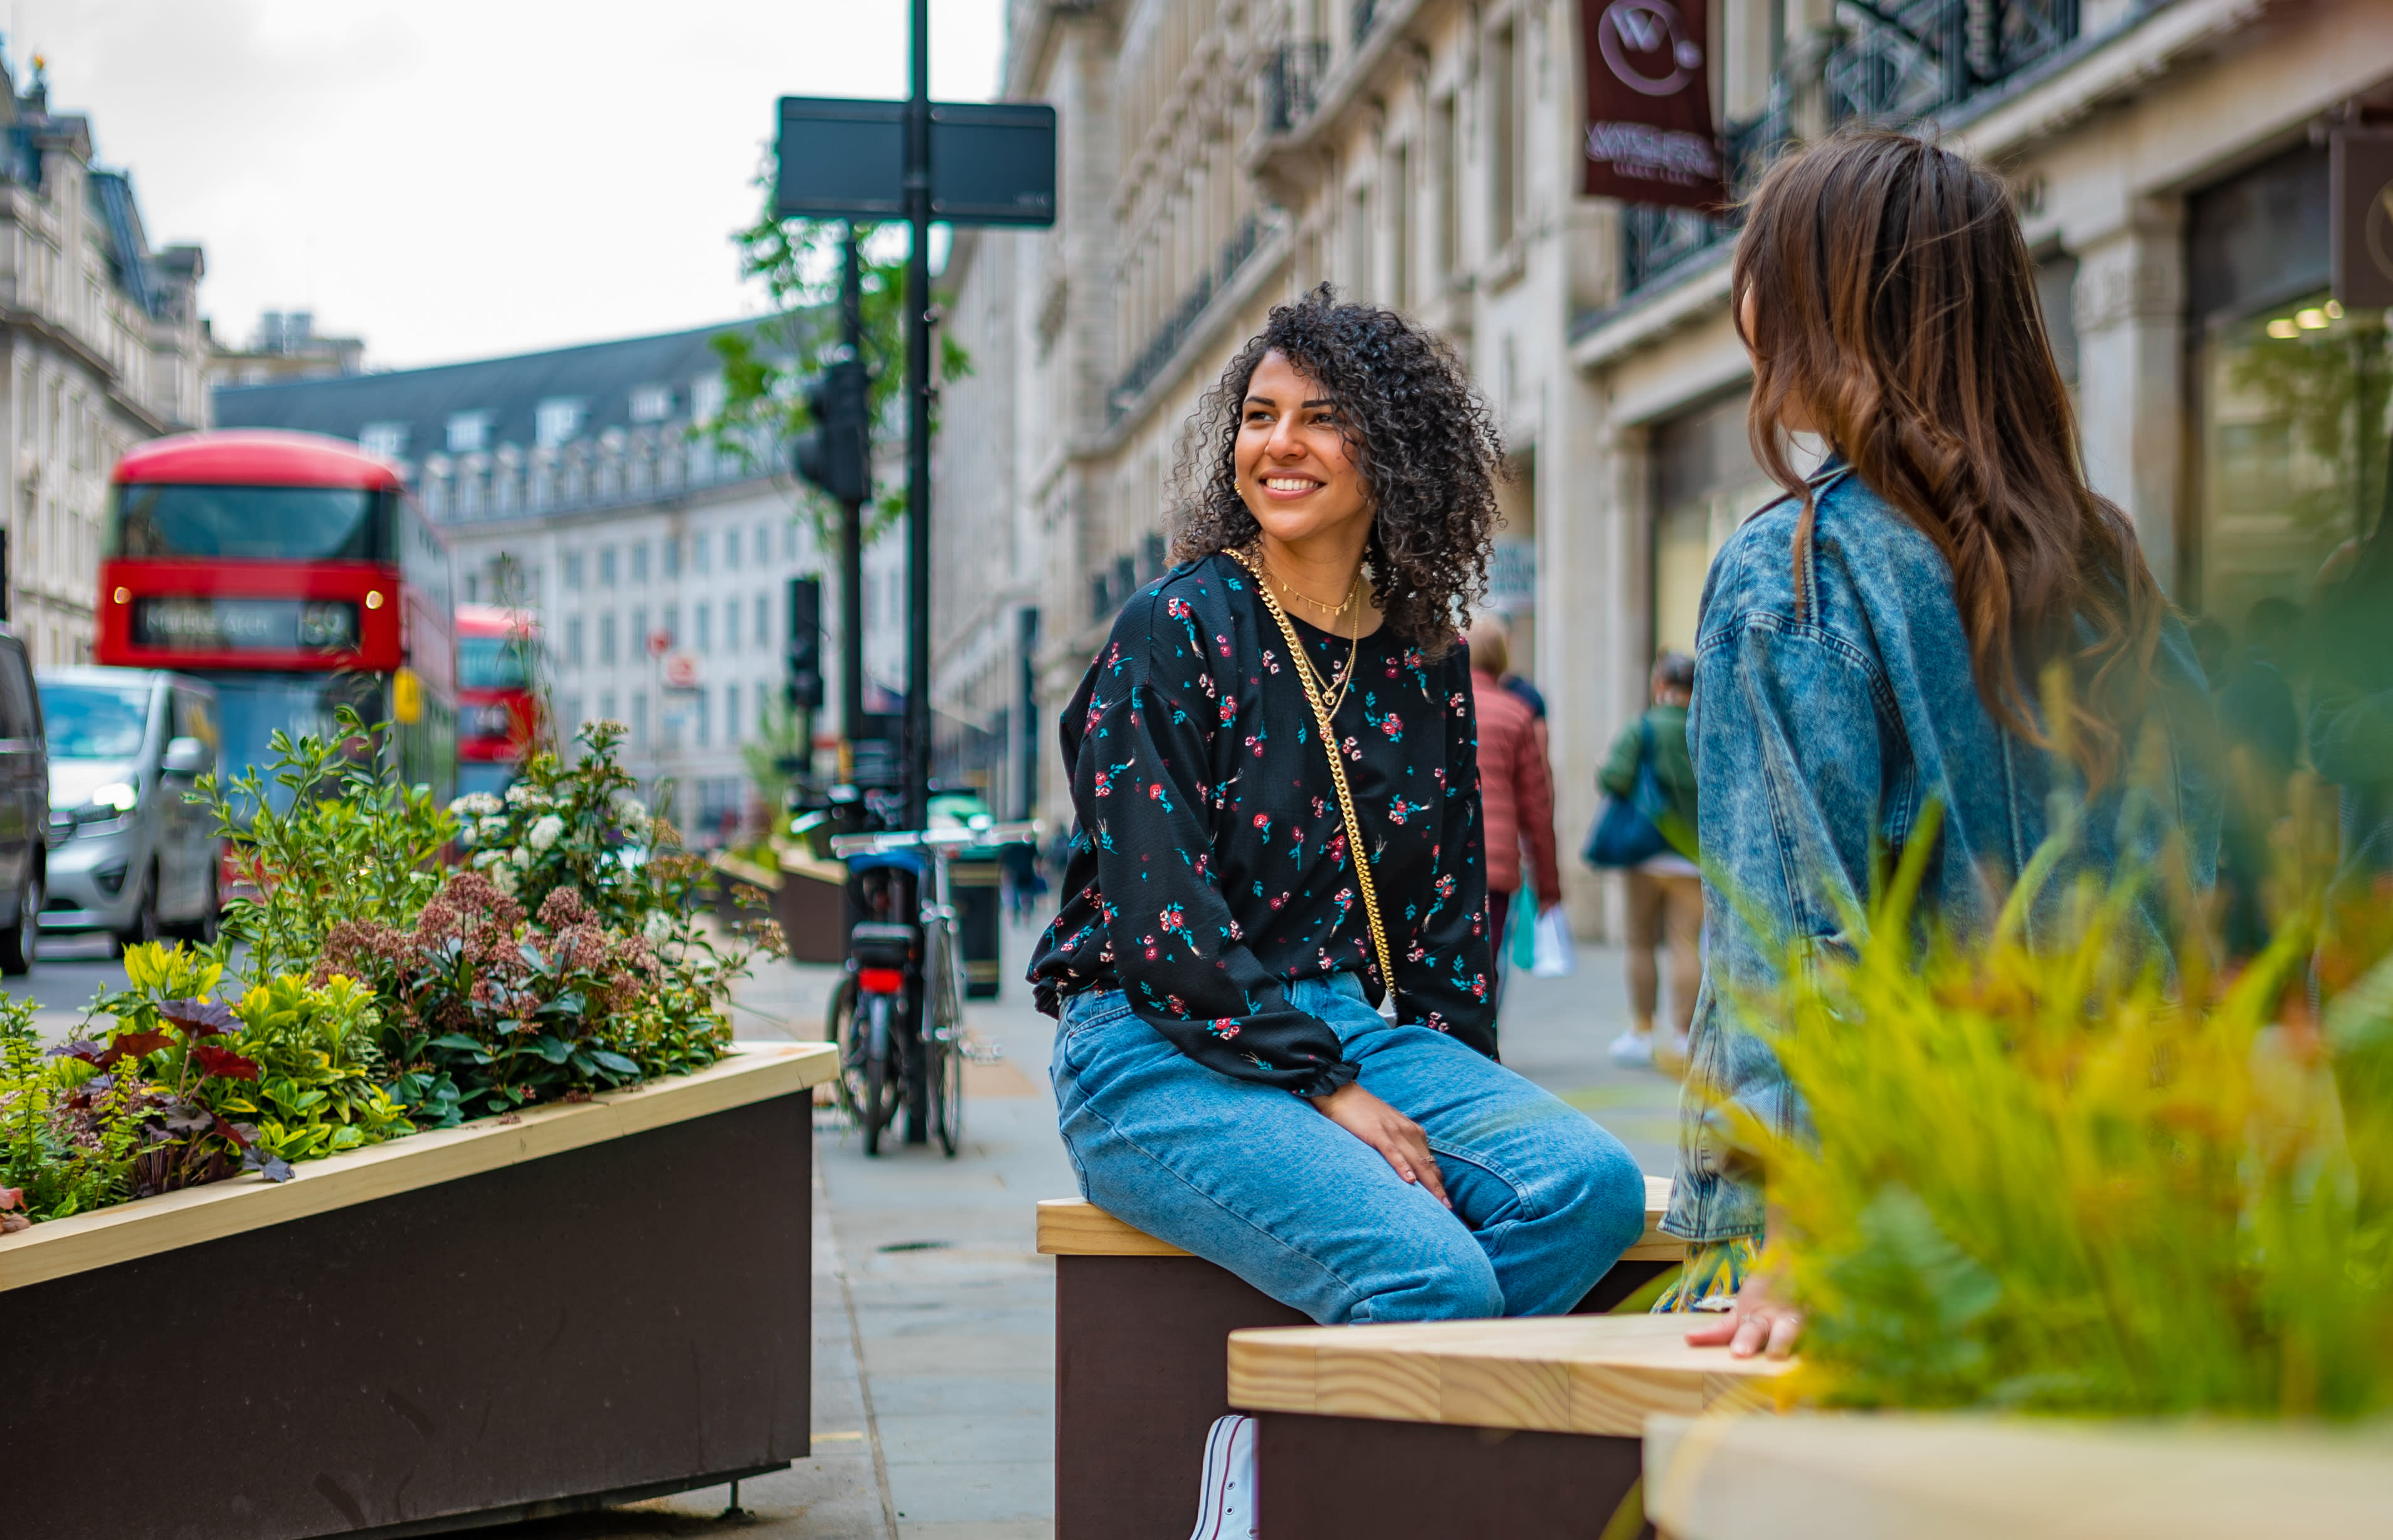 Two people seated by planters in Regent Street